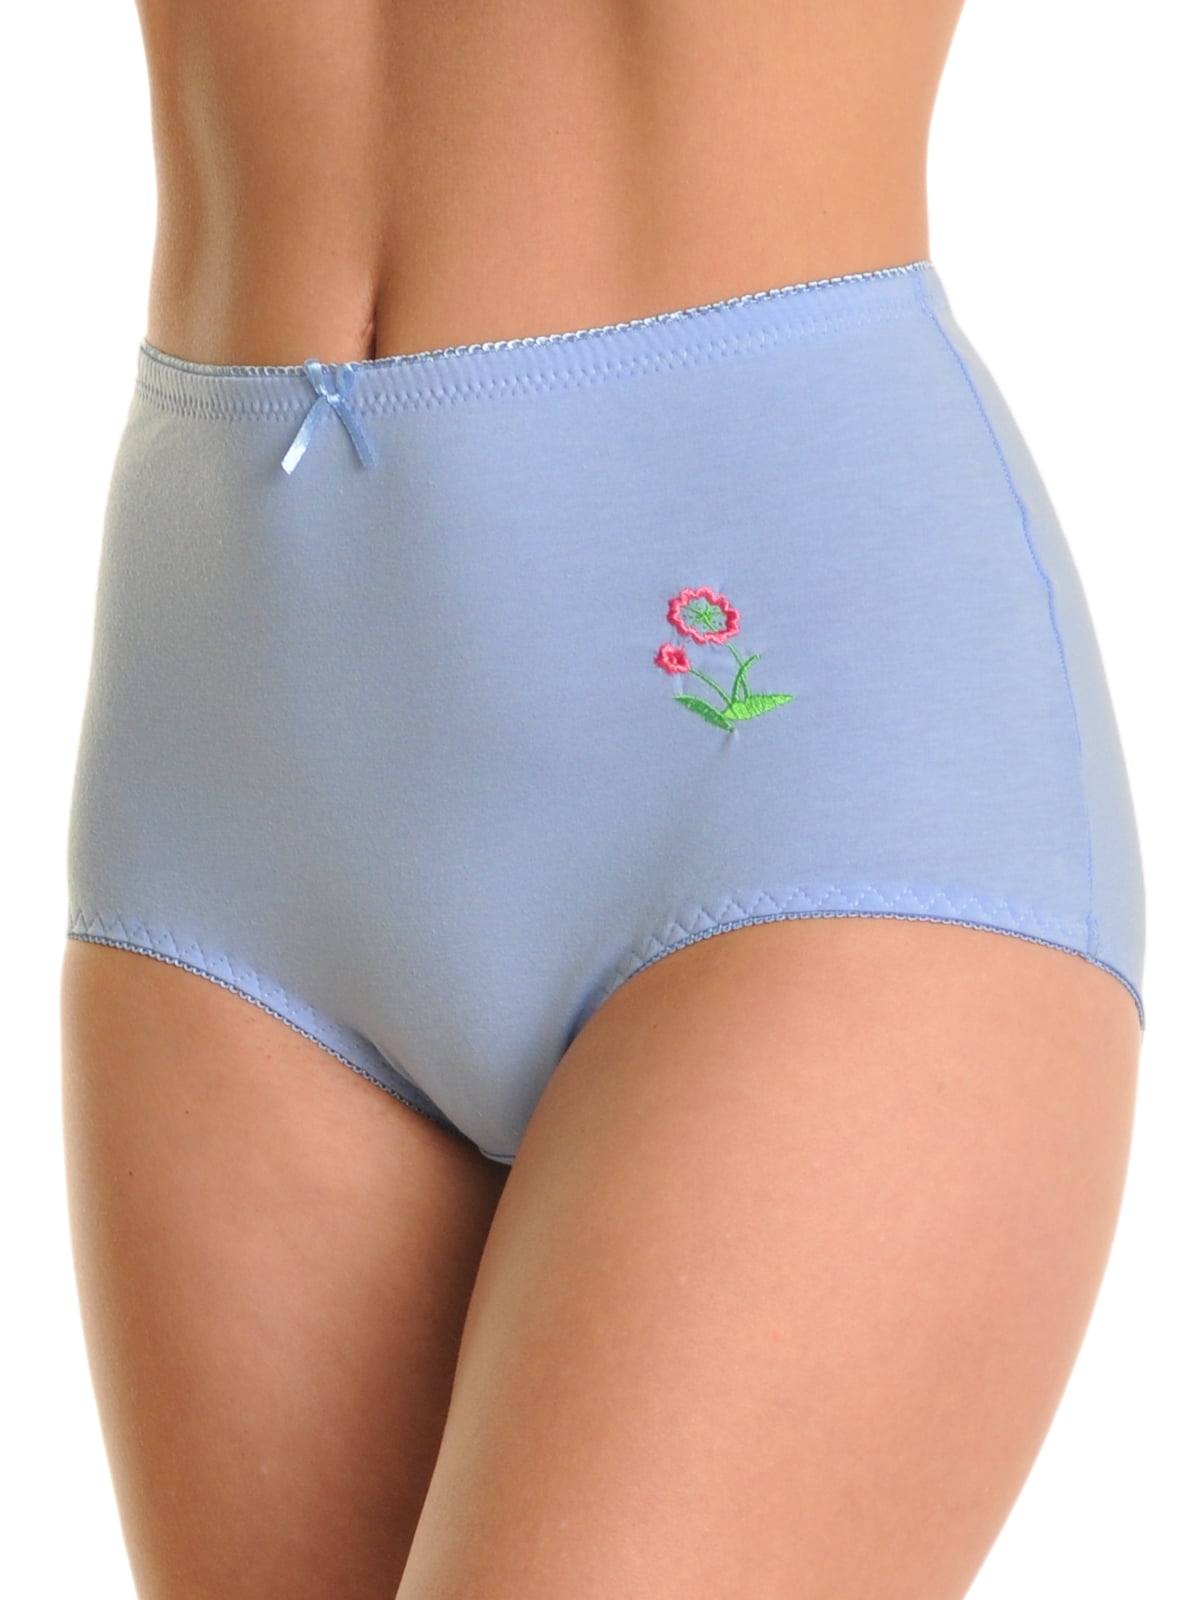 UPC 885851008111 product image for 2326260 DDI Cotton High Waist Briefs with Floral Embroidery, Assorted Color  | upcitemdb.com